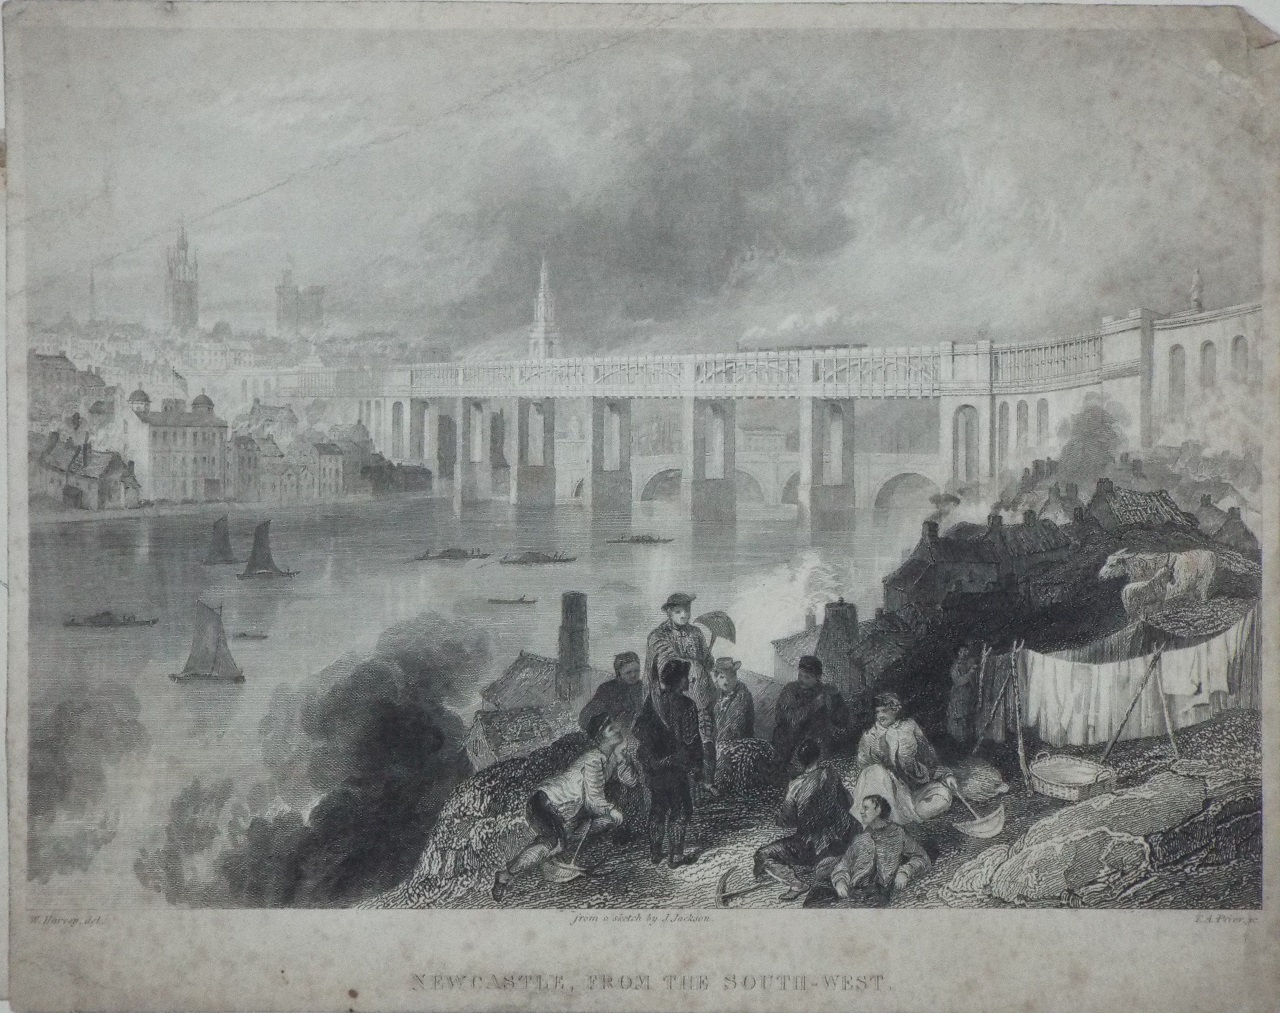 Print - Newcastle, from the South-West. - Prior